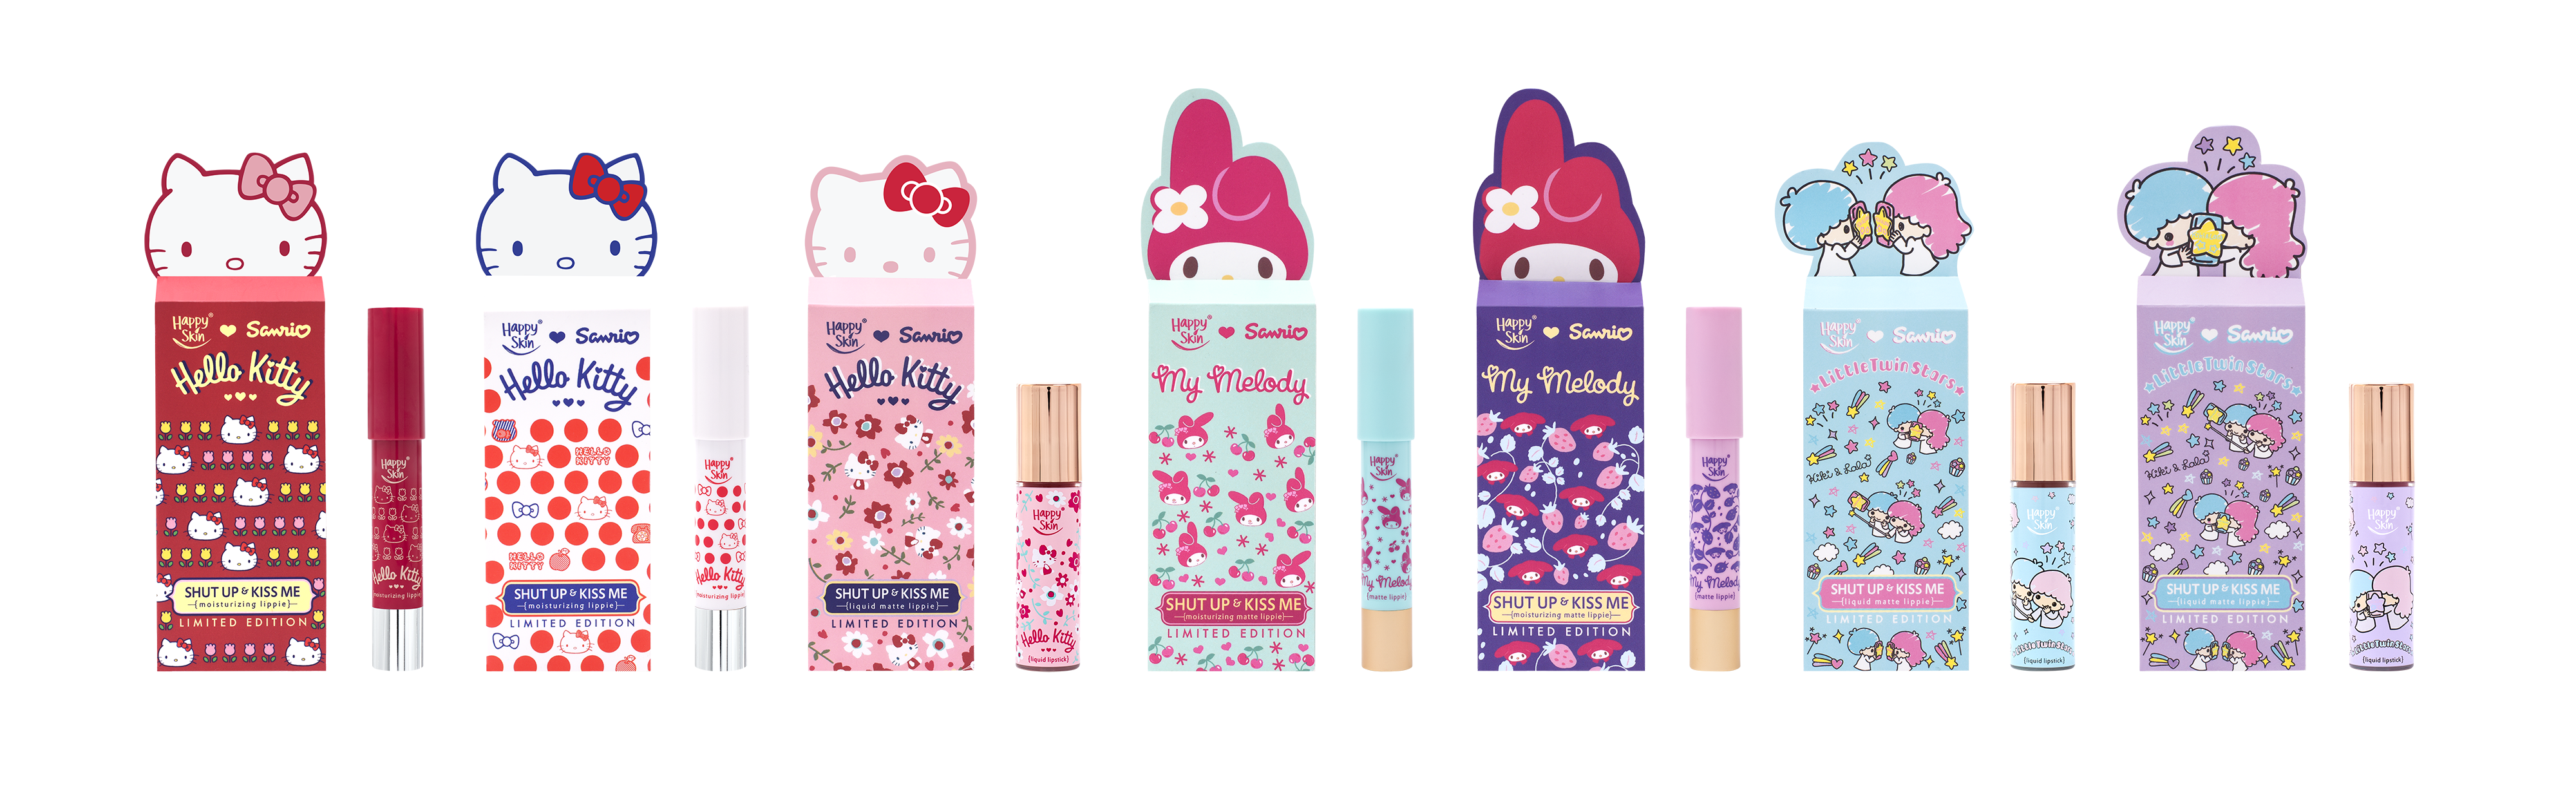 Can we please talk about how cute Happy Skin’s newest collection is?